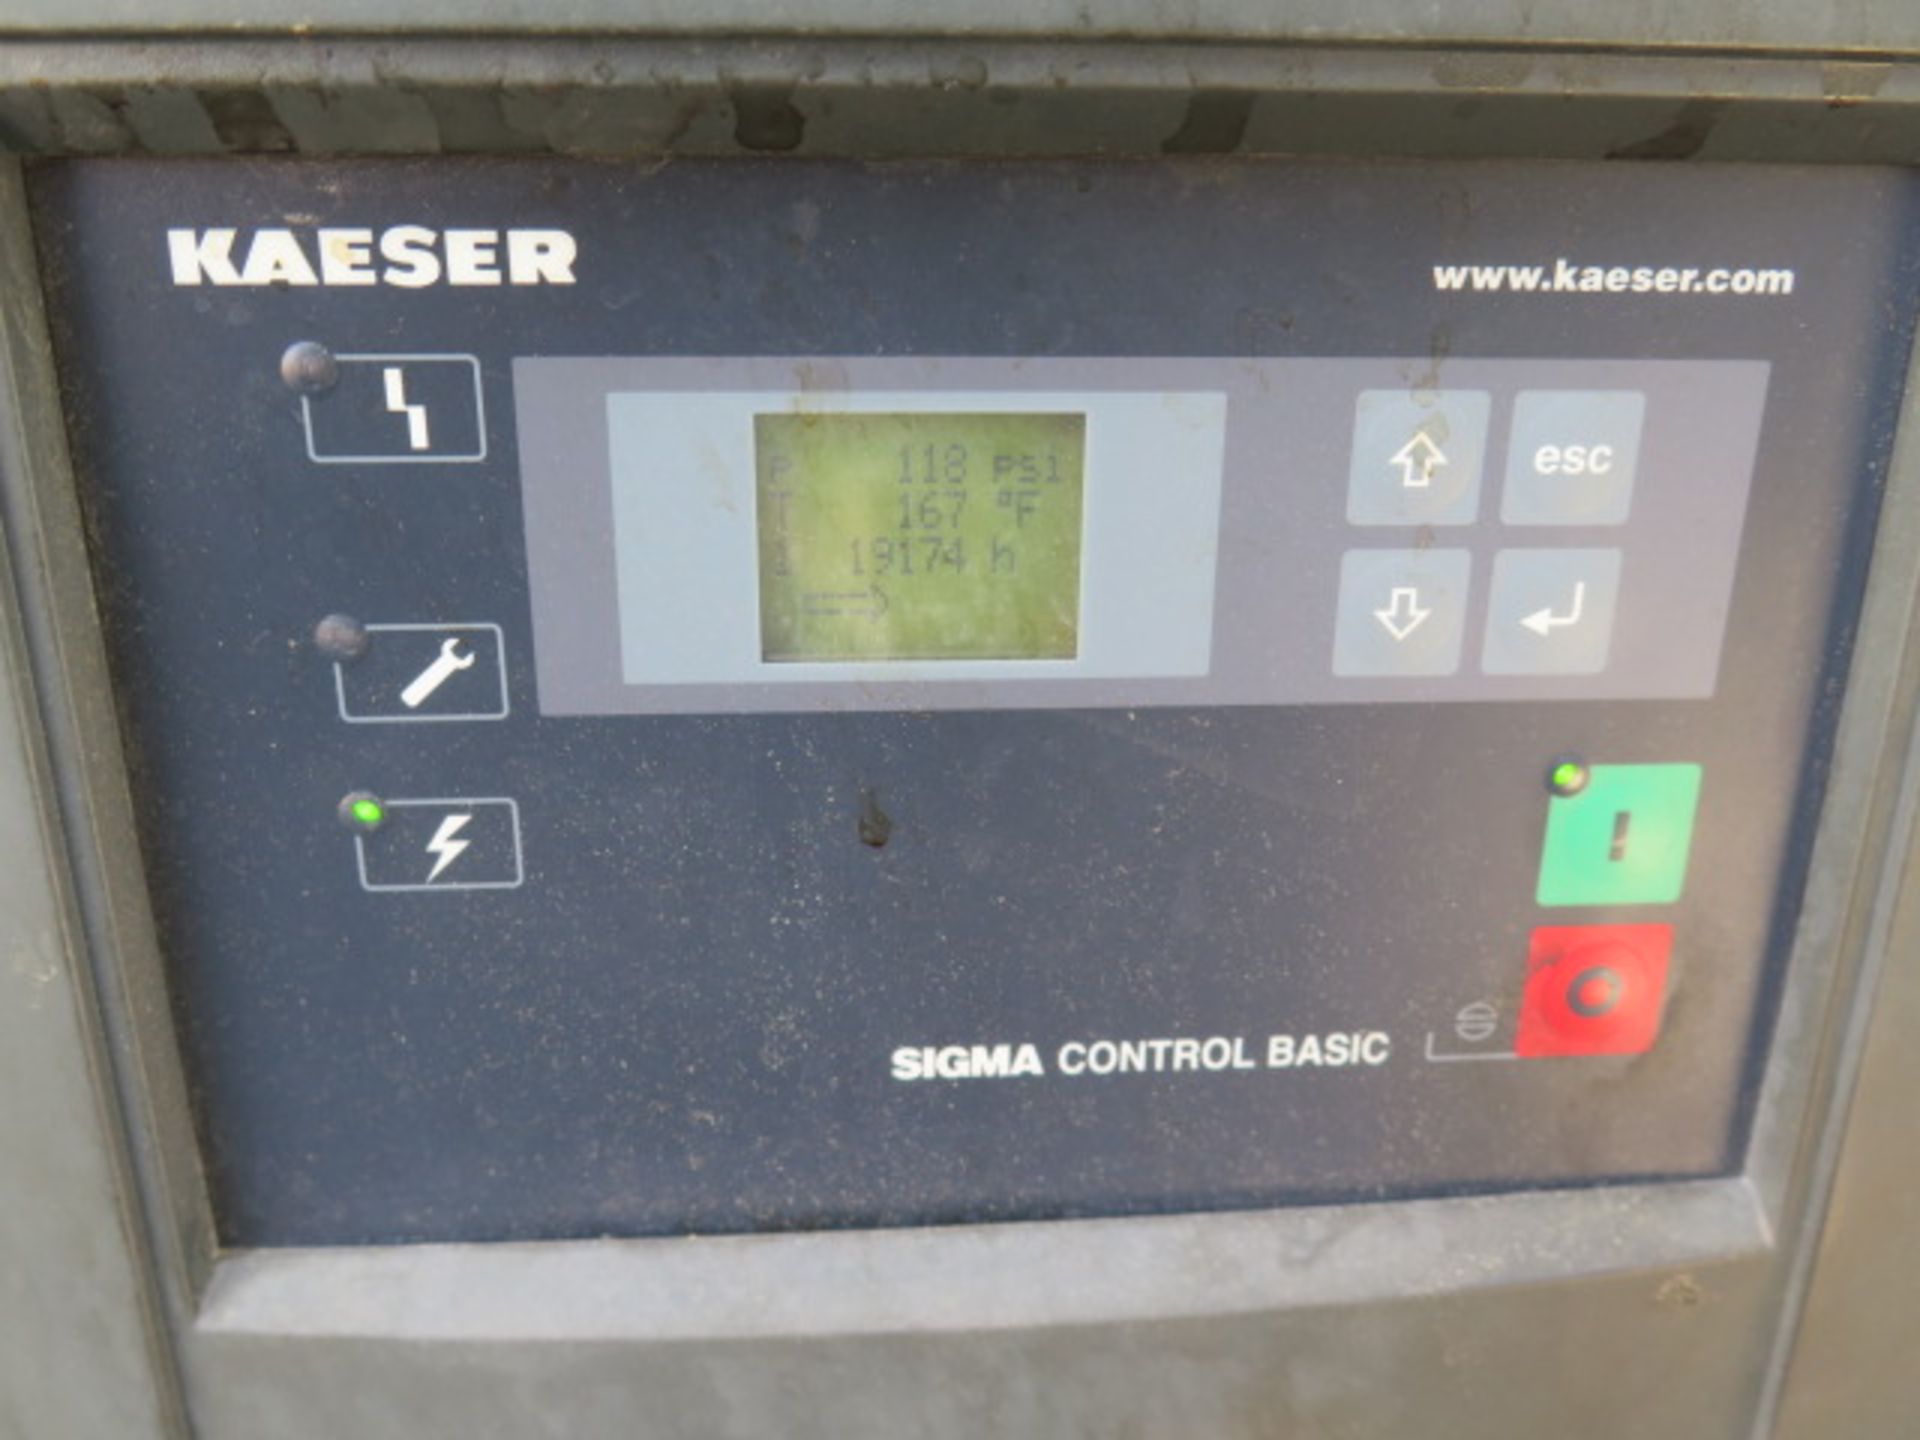 2015 Kaeser SM7.5 7.5Hp Rotary Air Compressor s/n 1243 w/Sigma Controls, 2018 Kaeser TA11,SOLD AS IS - Image 5 of 7